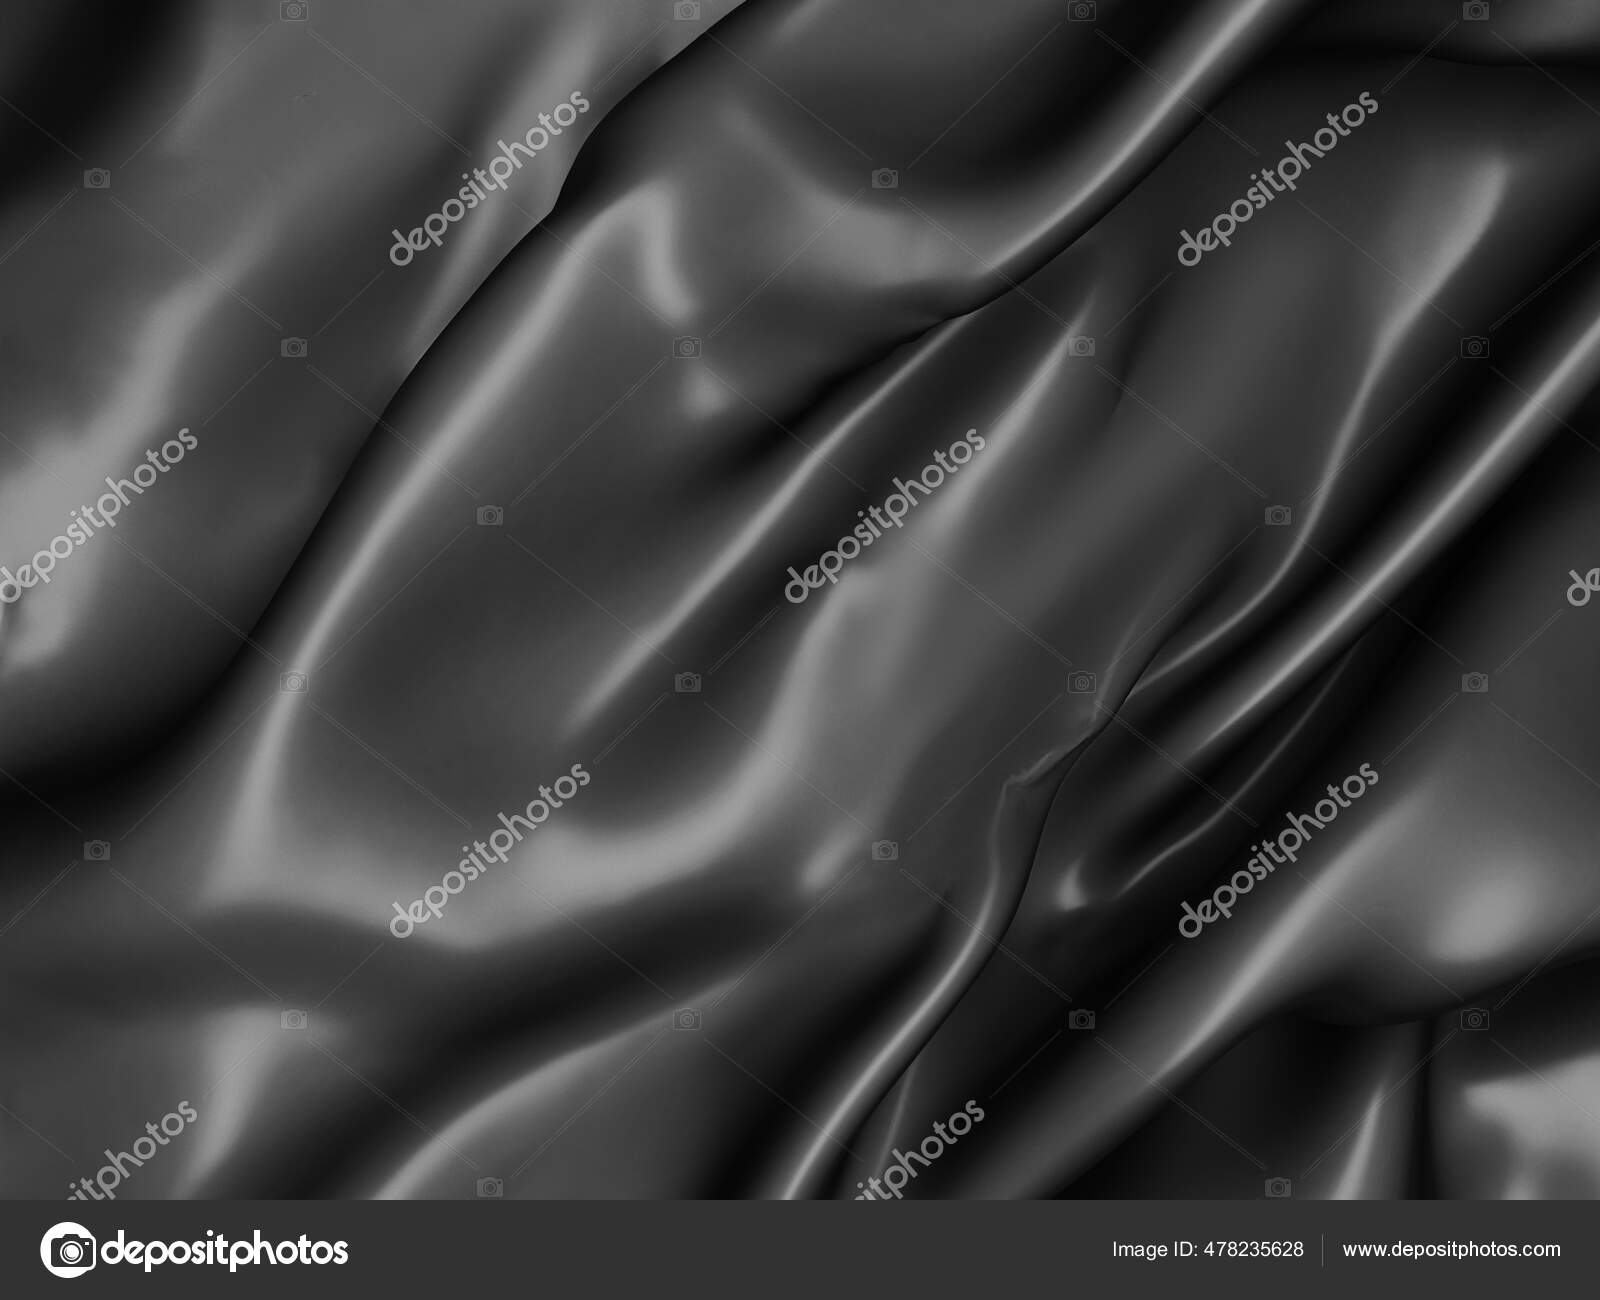 Black silk or satin fabric abstract background. Black abstract